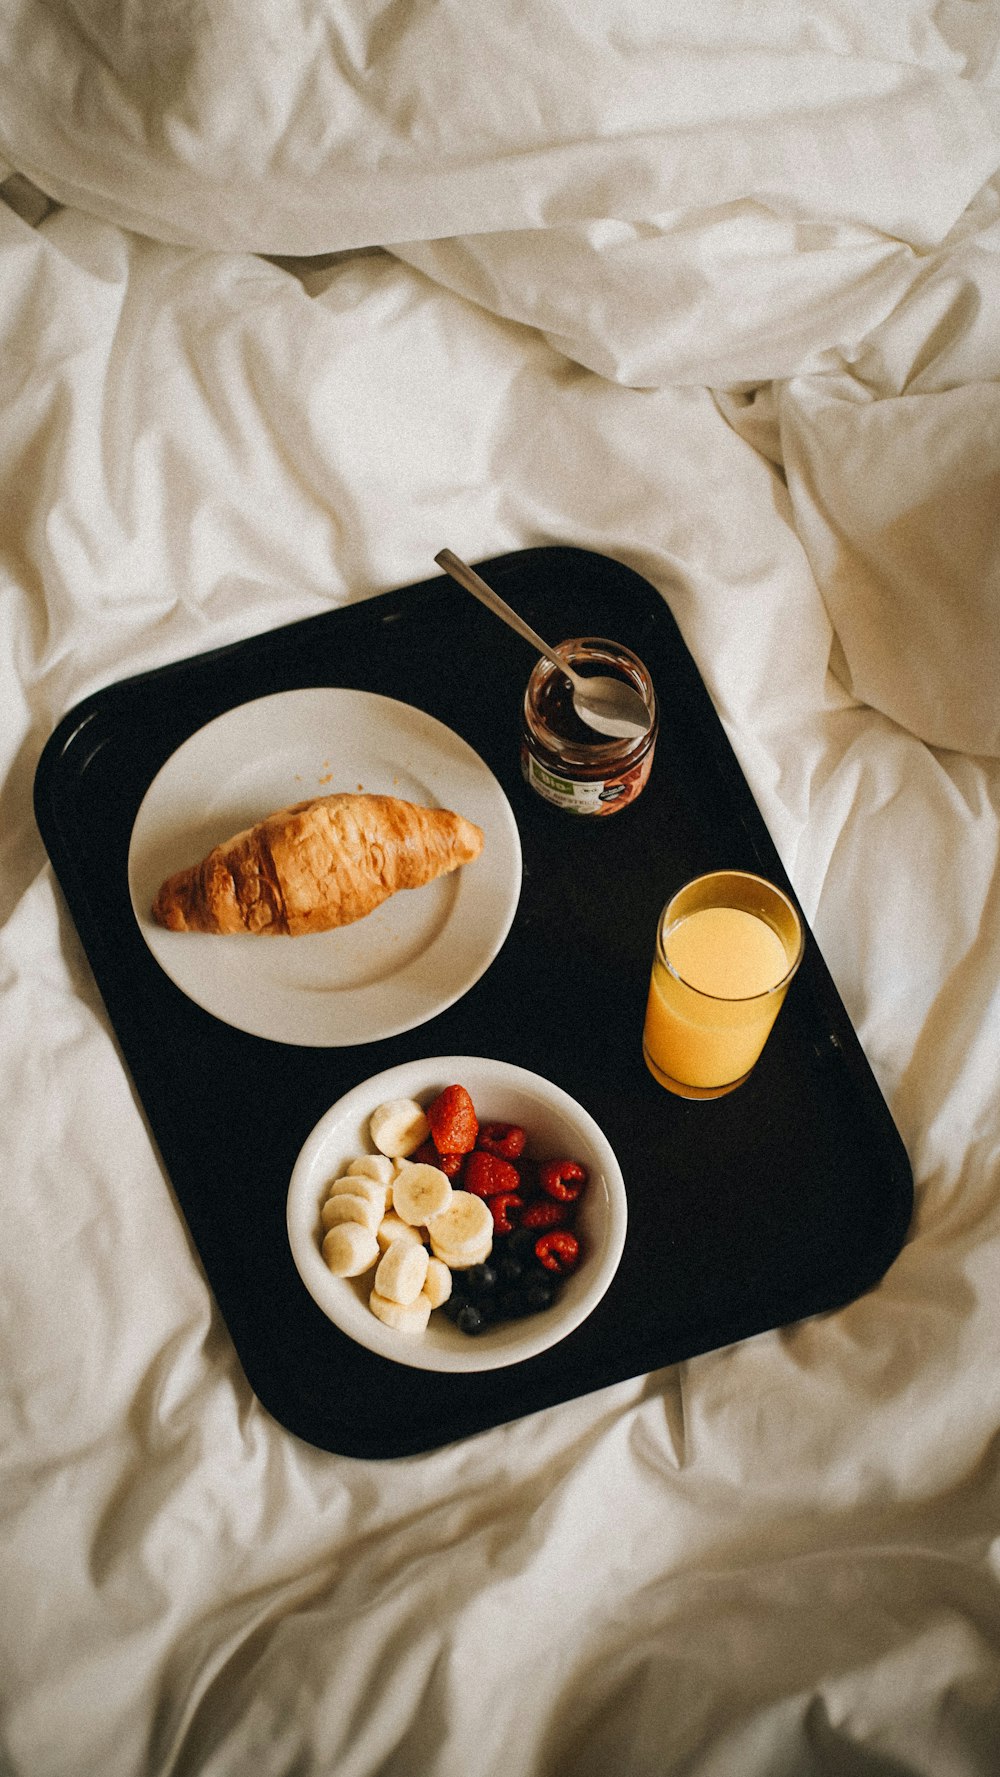 a tray of food on a bed with a glass of orange juice